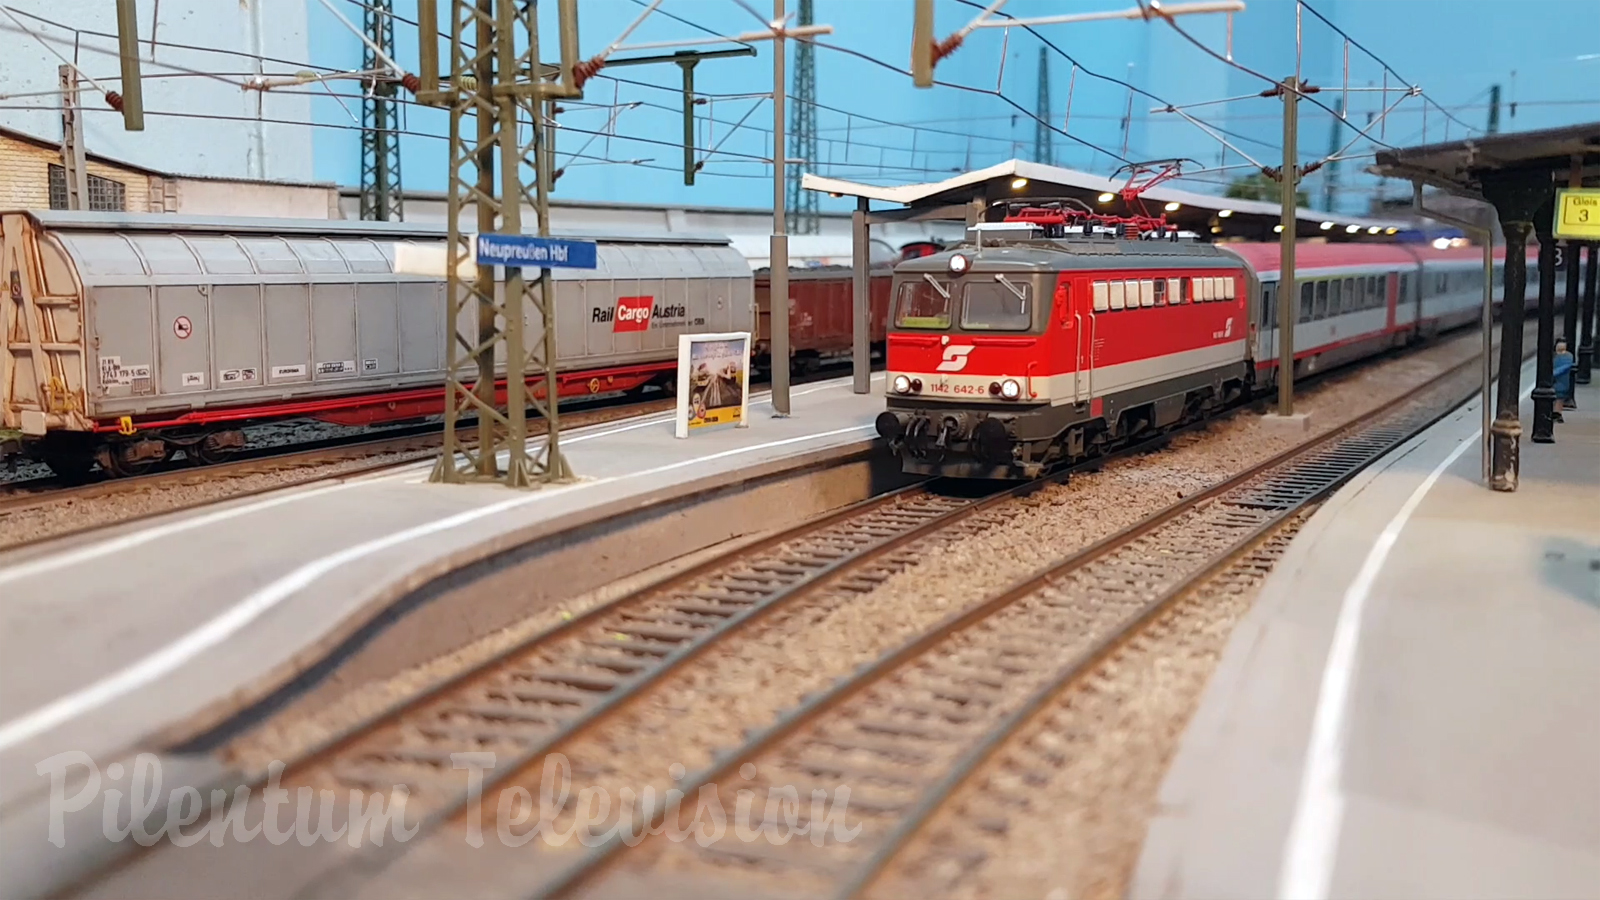 One of Chile’s finest and most detailed private model railway layouts in HO scale